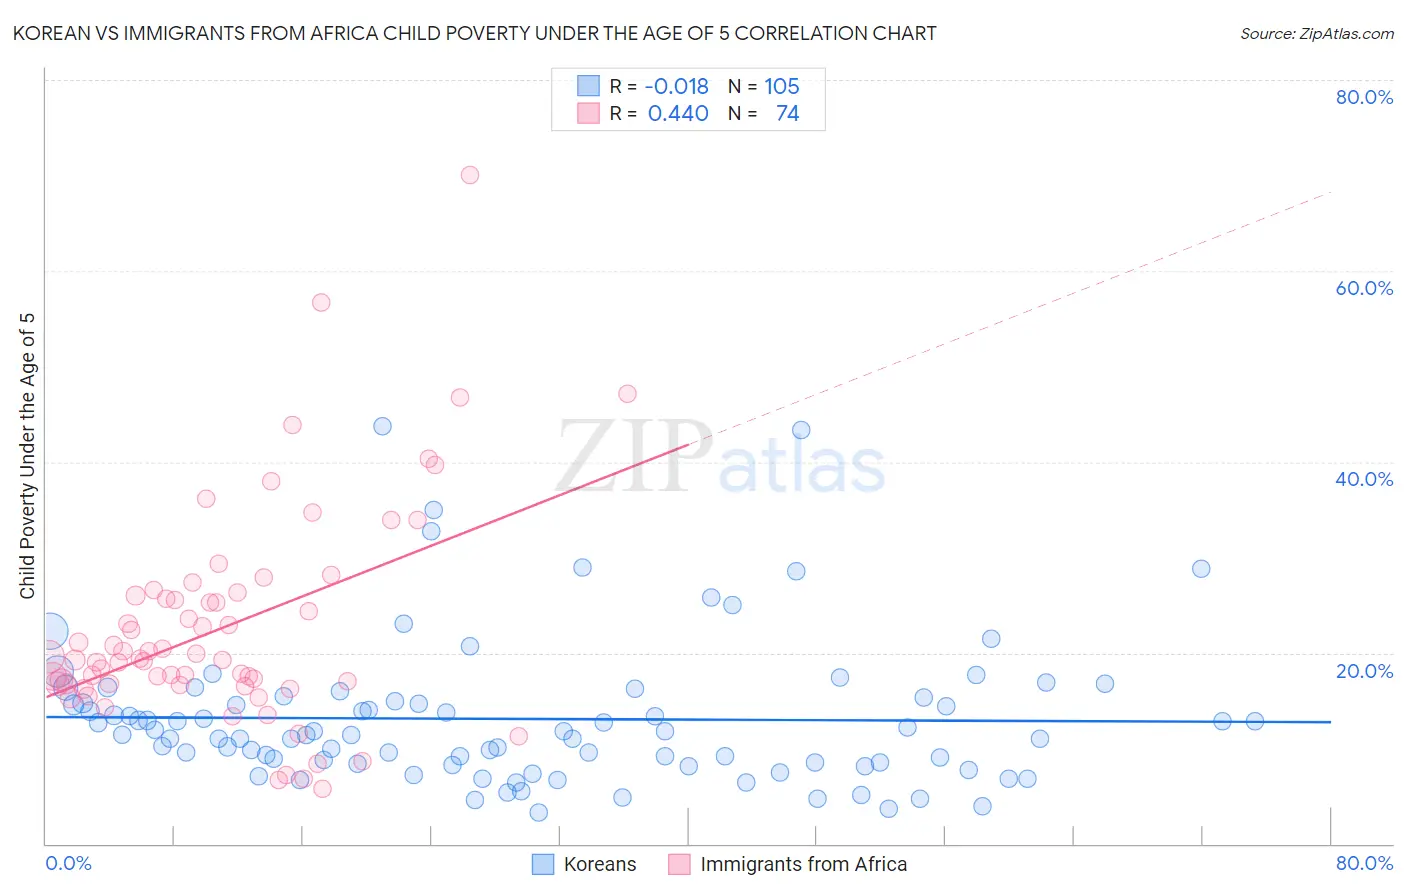 Korean vs Immigrants from Africa Child Poverty Under the Age of 5